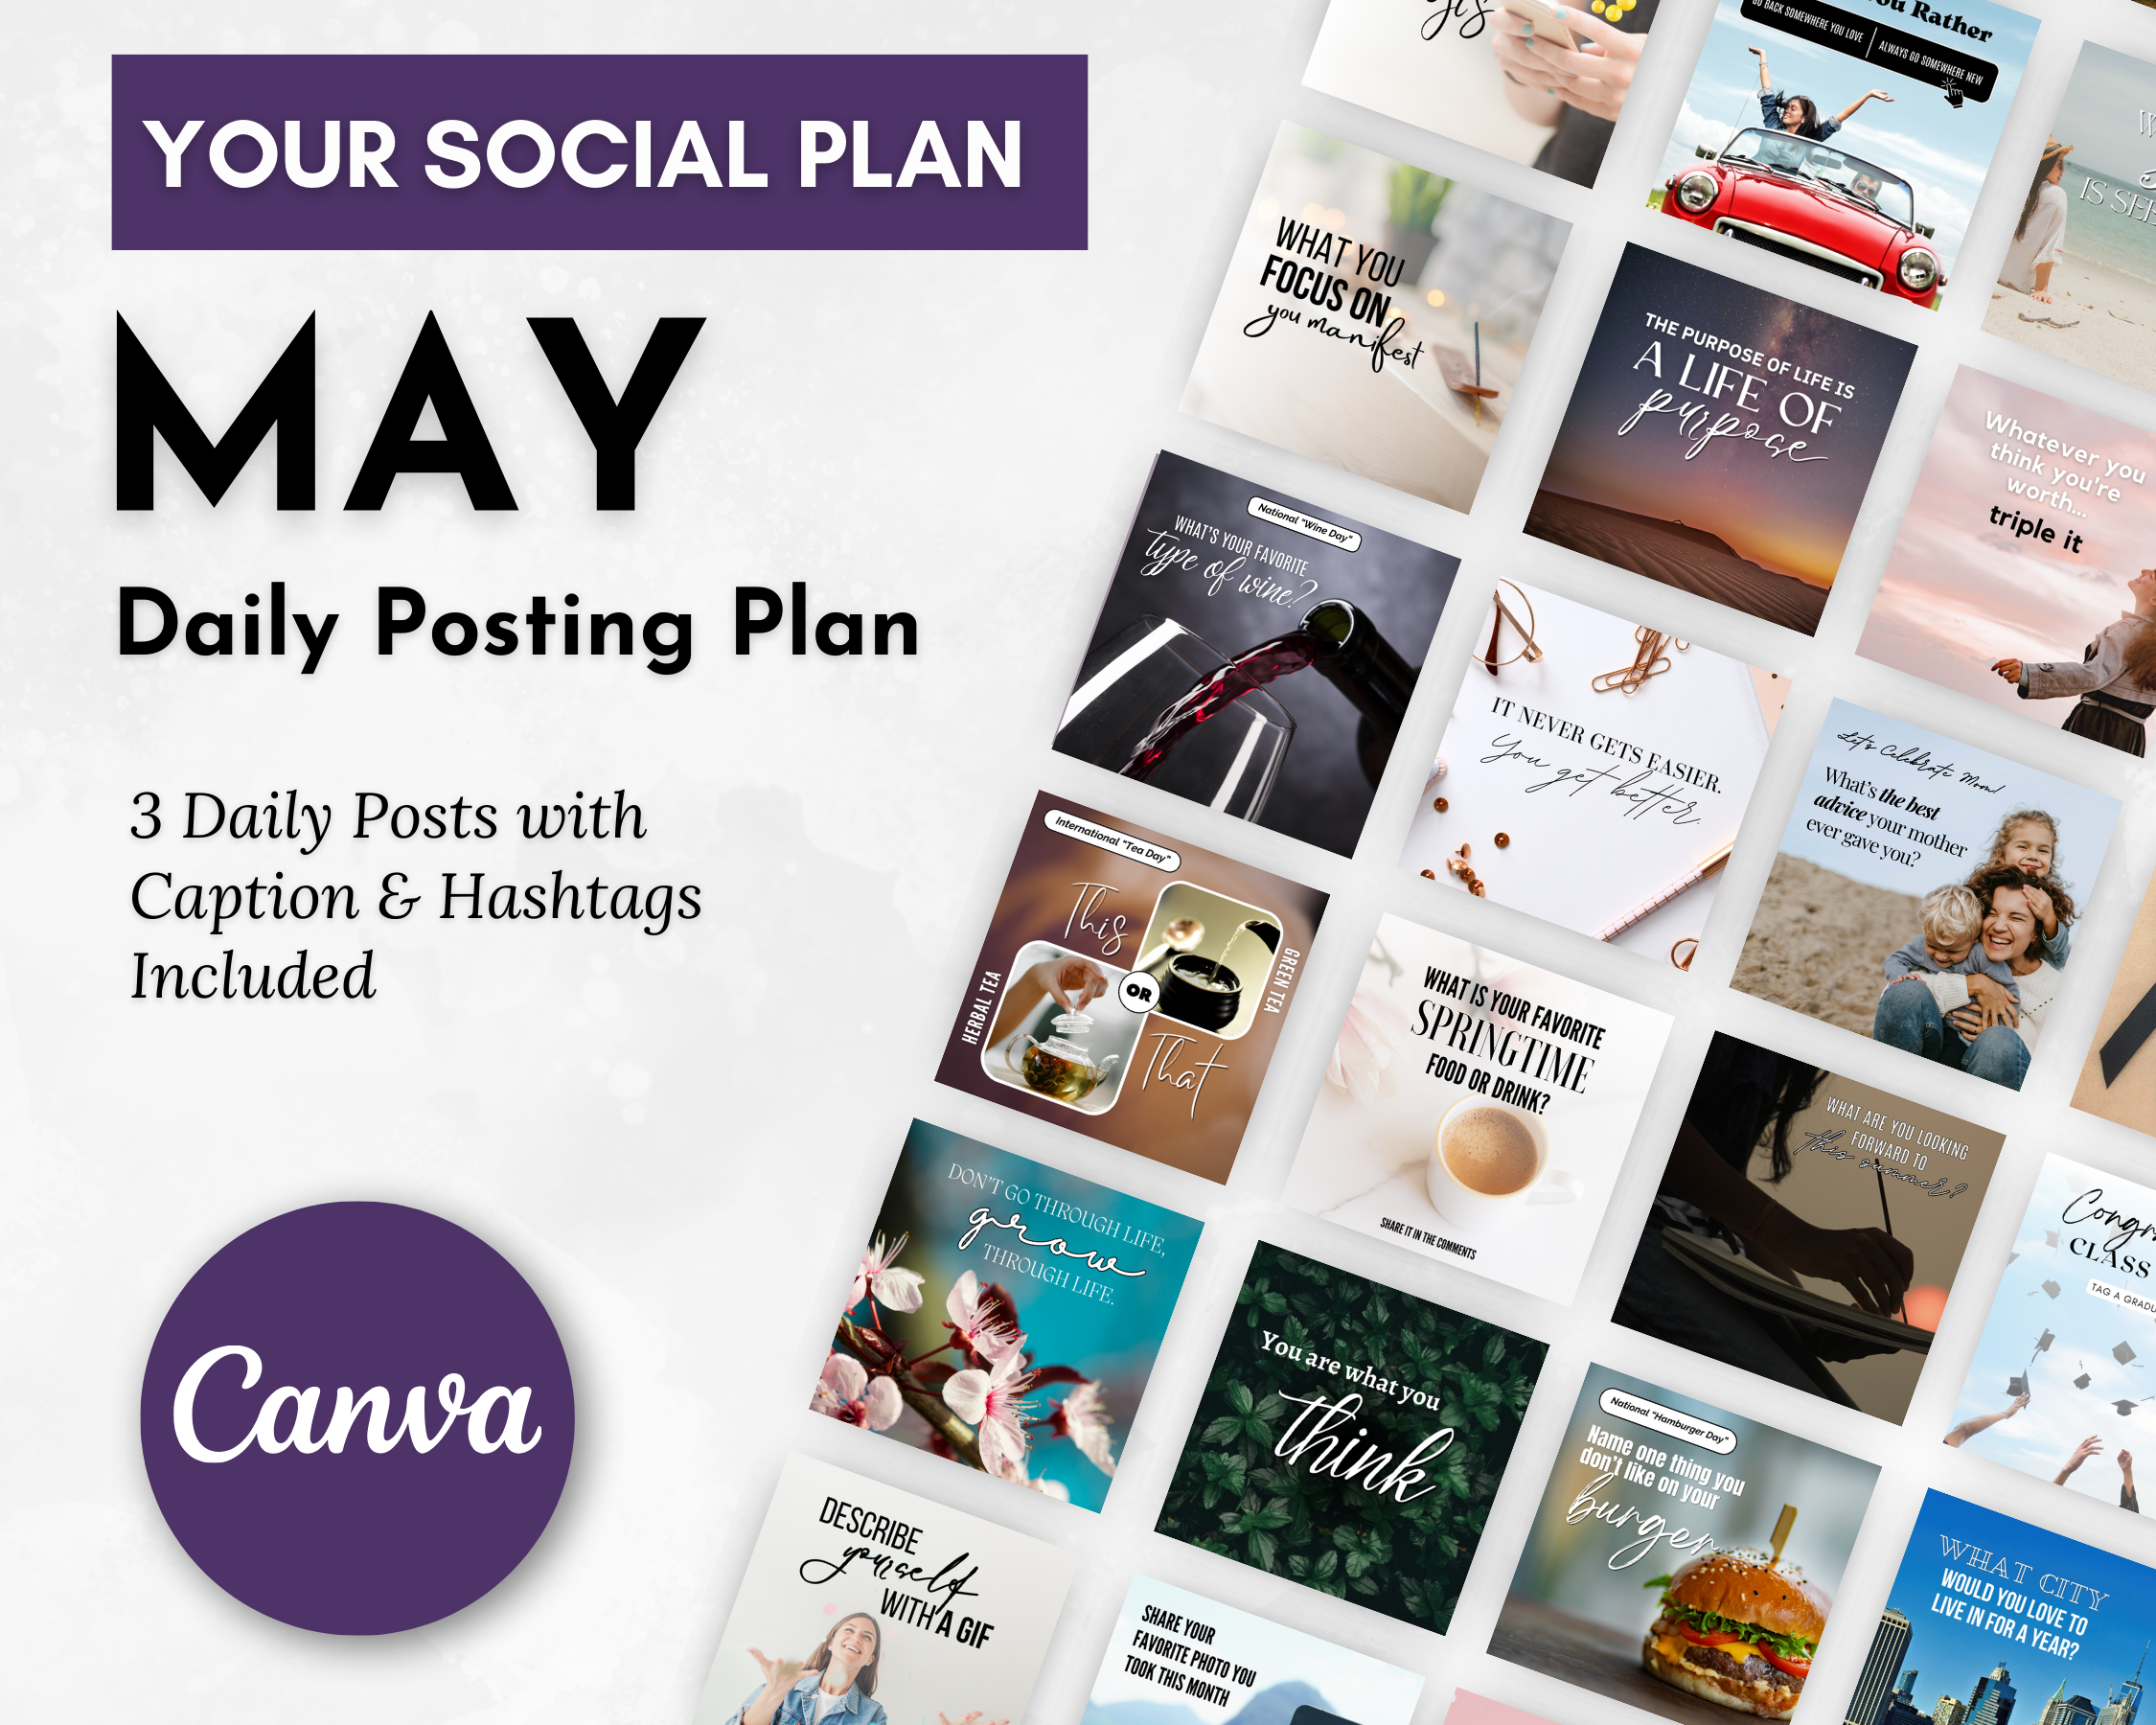 A graphic promoting the May Daily Posting Plan - Your Social Plan for April with daily posting plans, including images and captions, displayed in a collage style, made with Get Socially Inclined.